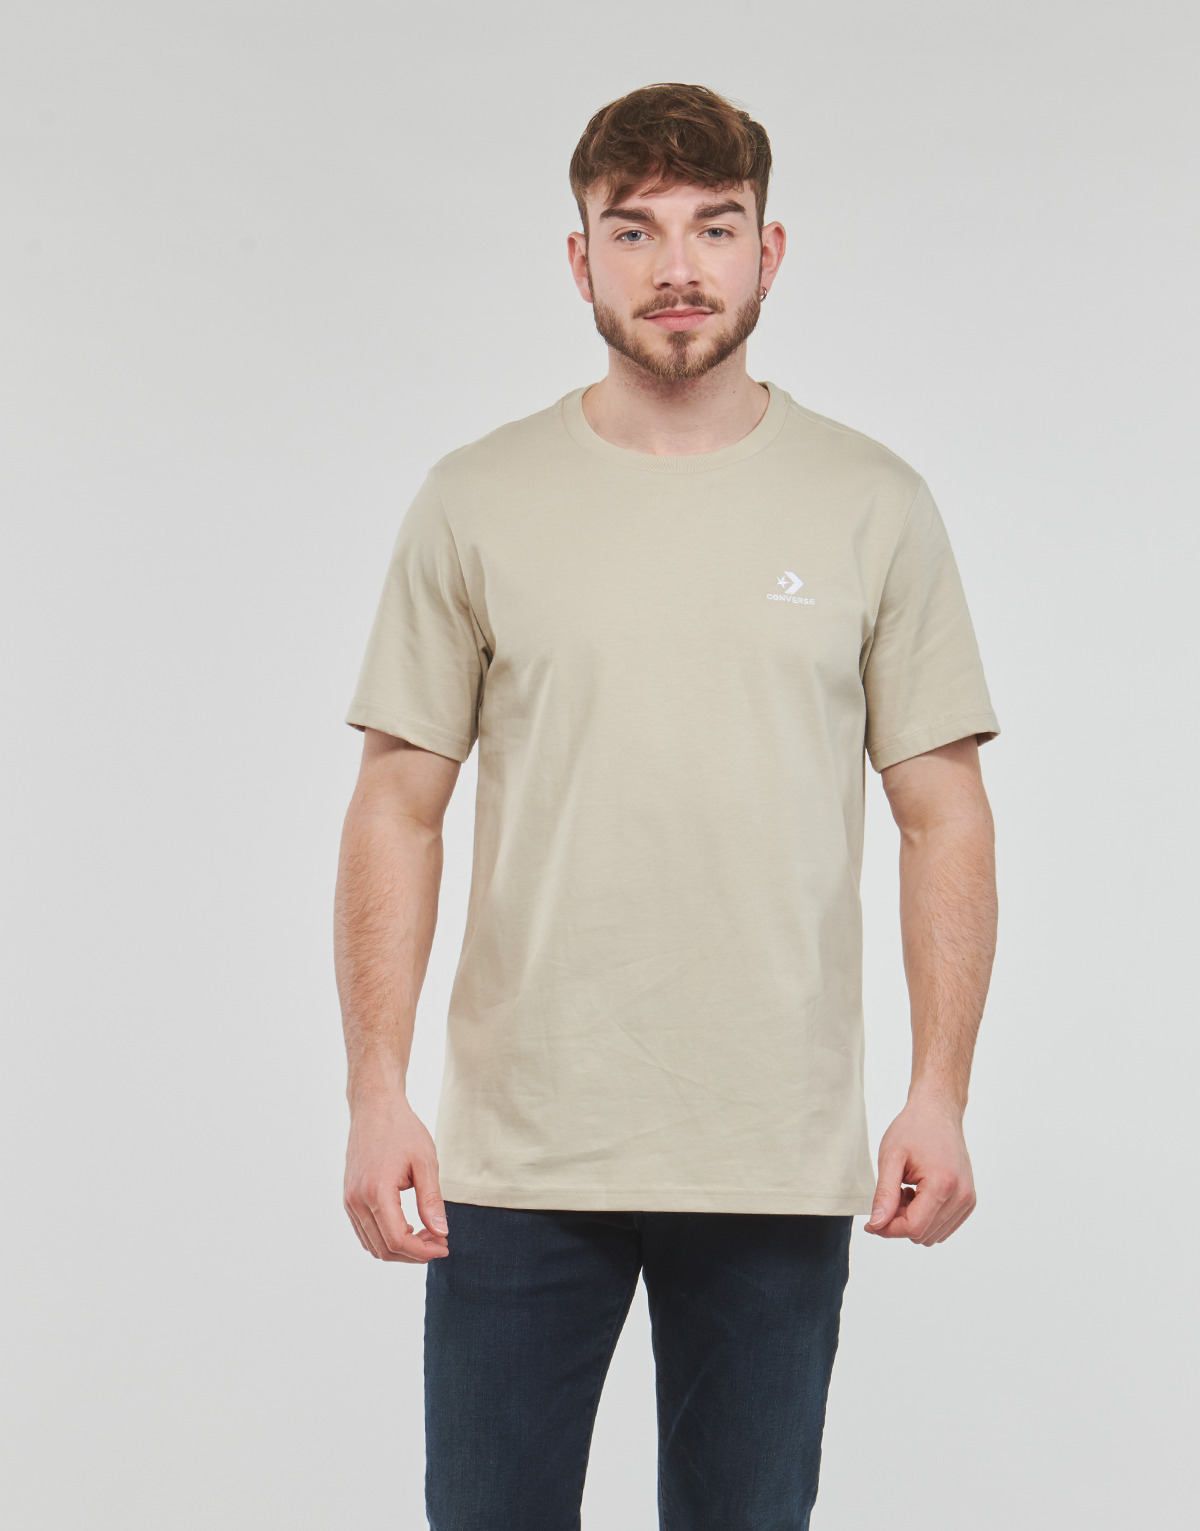 Converse Beige GO-TO EMBROIDERED STAR CHEVRON TEE 6W0xdshB